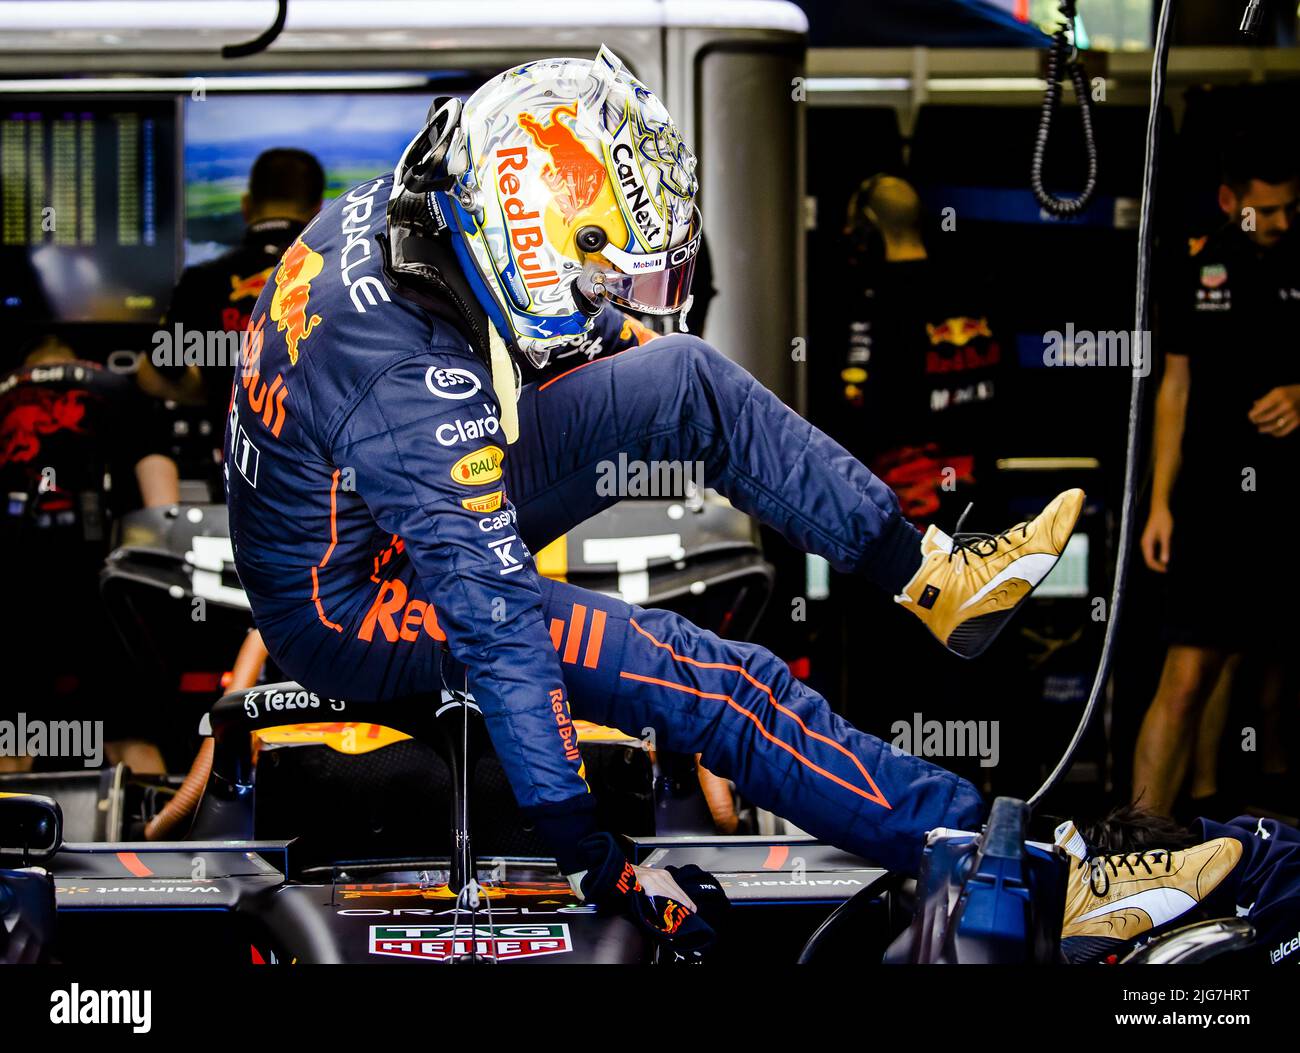 SPIELBERG - Max Verstappen (1) with the Oracle Red Bull Racing RB18 Honda in the pit box during practice 1 ahead of the F1 Grand Prix of Austria at the Red Bull Ring on July 8, 2022 in Spielberg, Austria. ANP SEM VAN DER WAL Credit: ANP/Alamy Live News Stock Photo